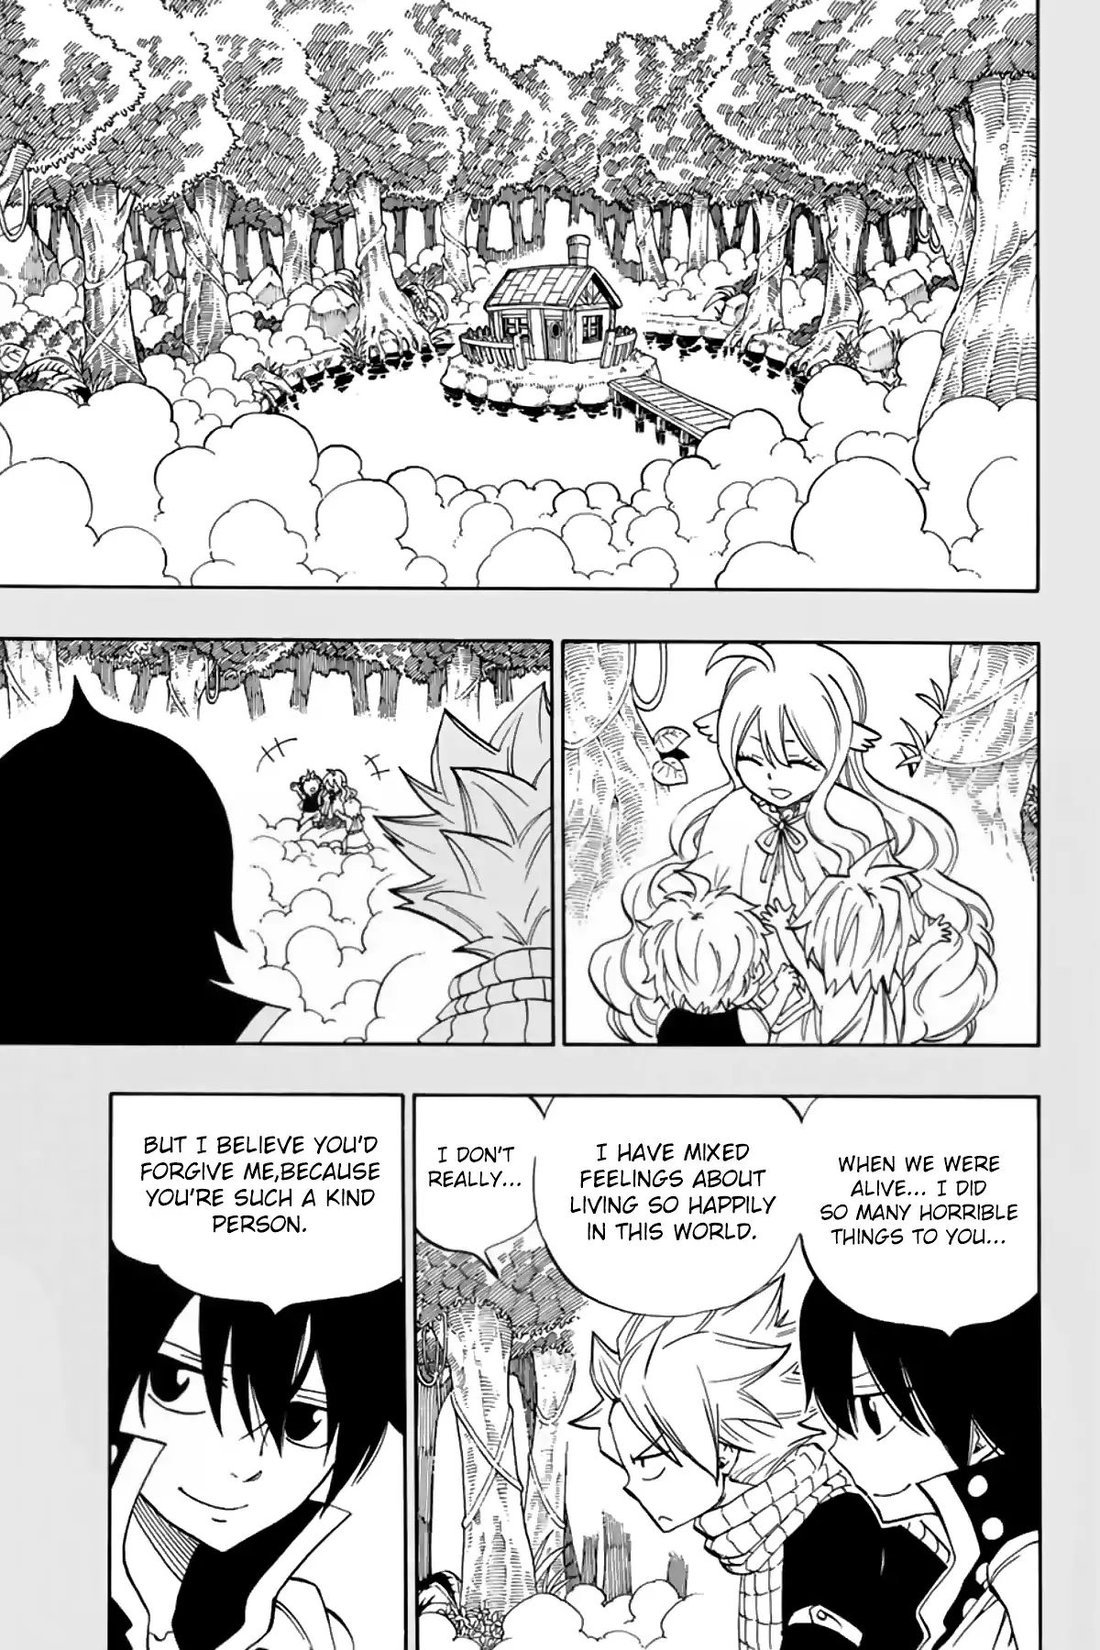 Angiecakes1990 — 😭 I waited for this for Zeref and Natsu having a